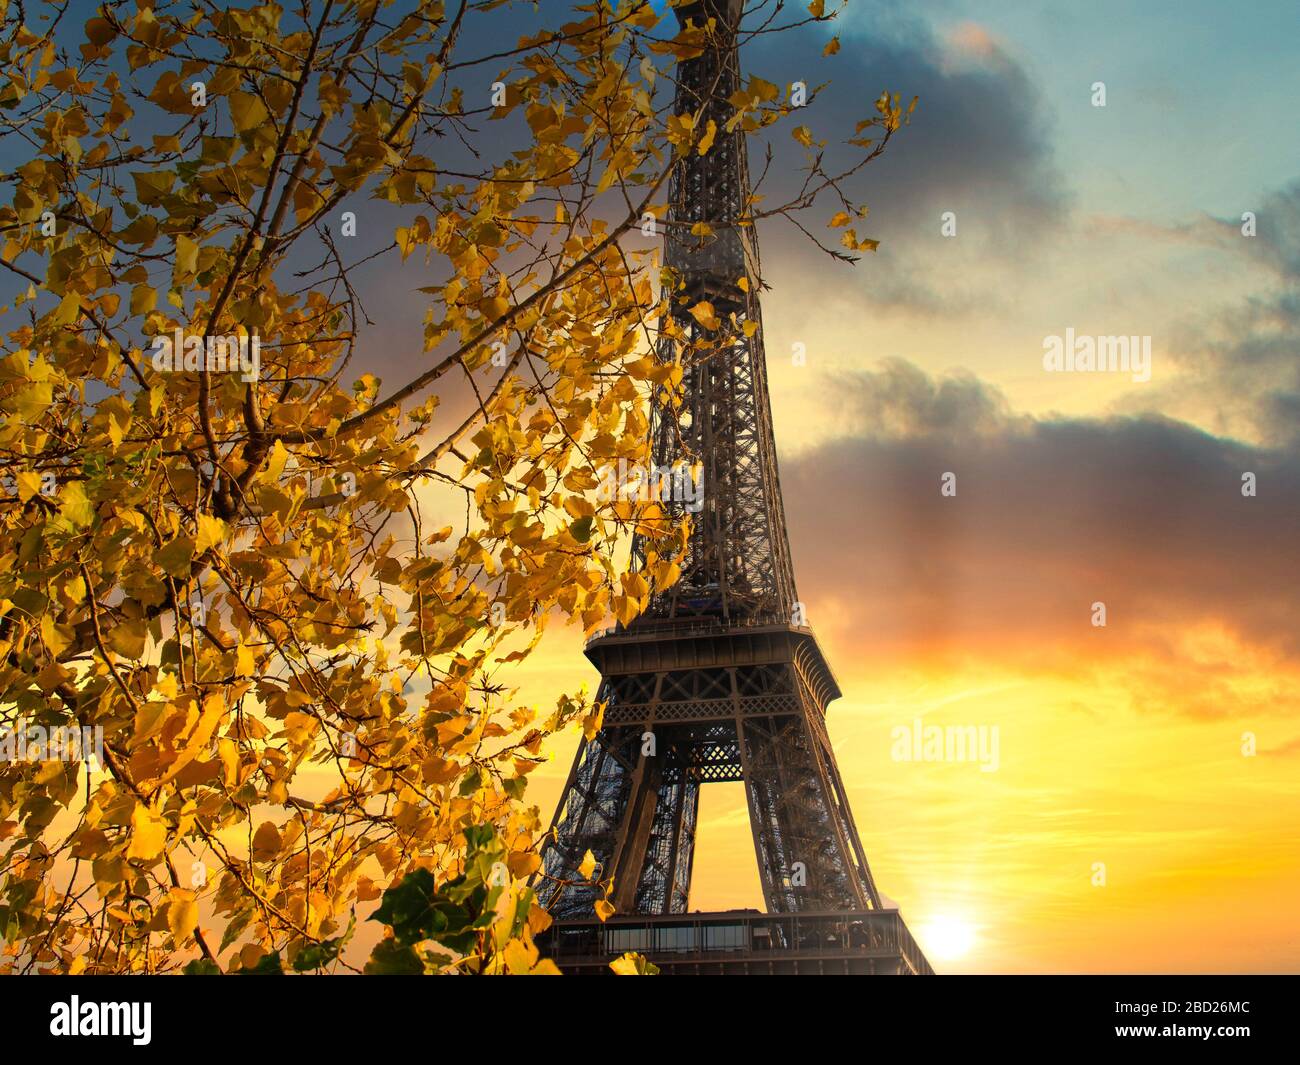 Eiffel tower at sunset in Paris, France Stock Photo